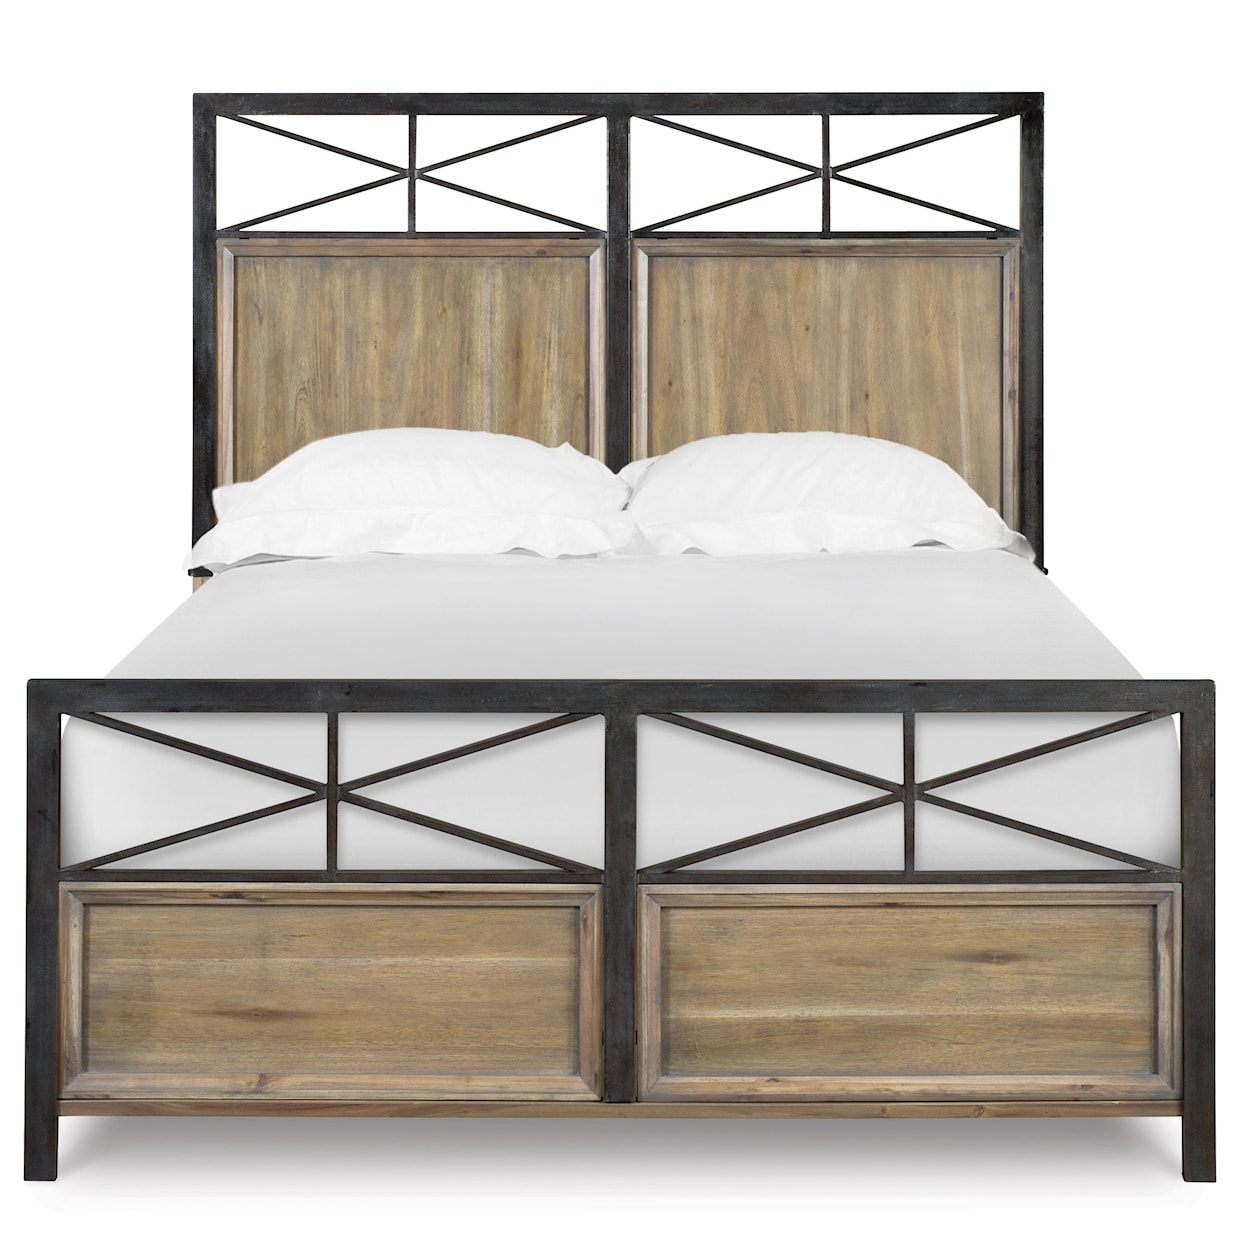 Next Generation by Magnussen Bailey Full Metal &Wood Panel Bed